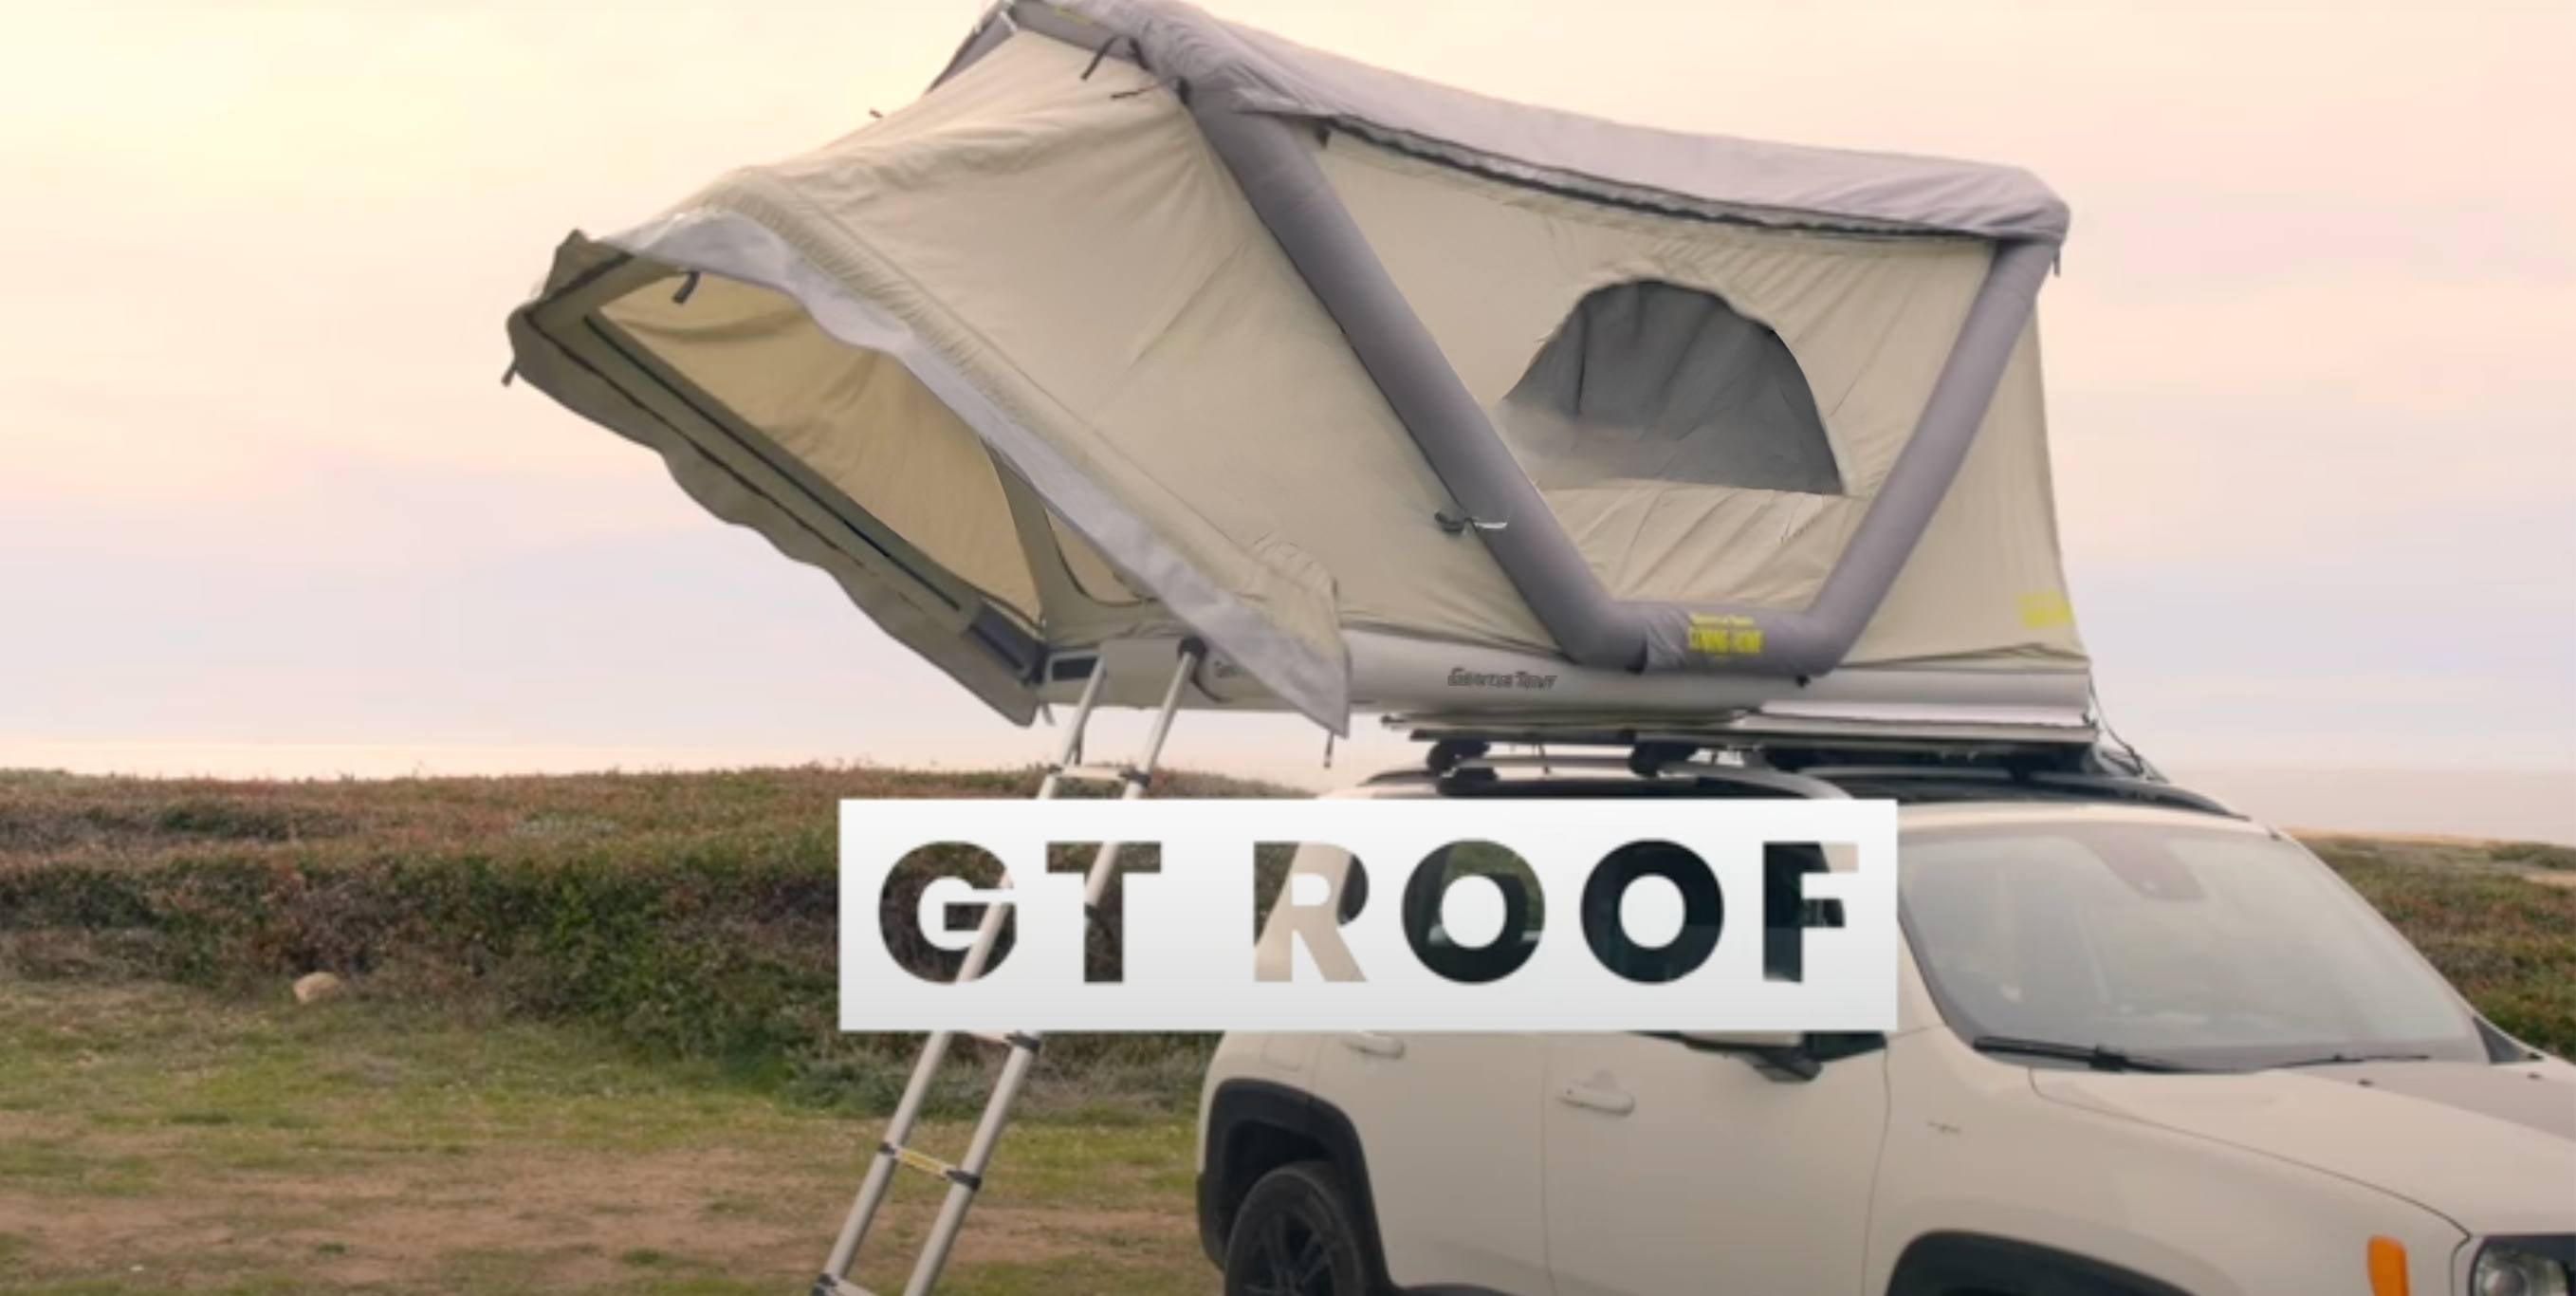 Load video: Video manual for setting up and taking down the GT ROOF rooftop tent